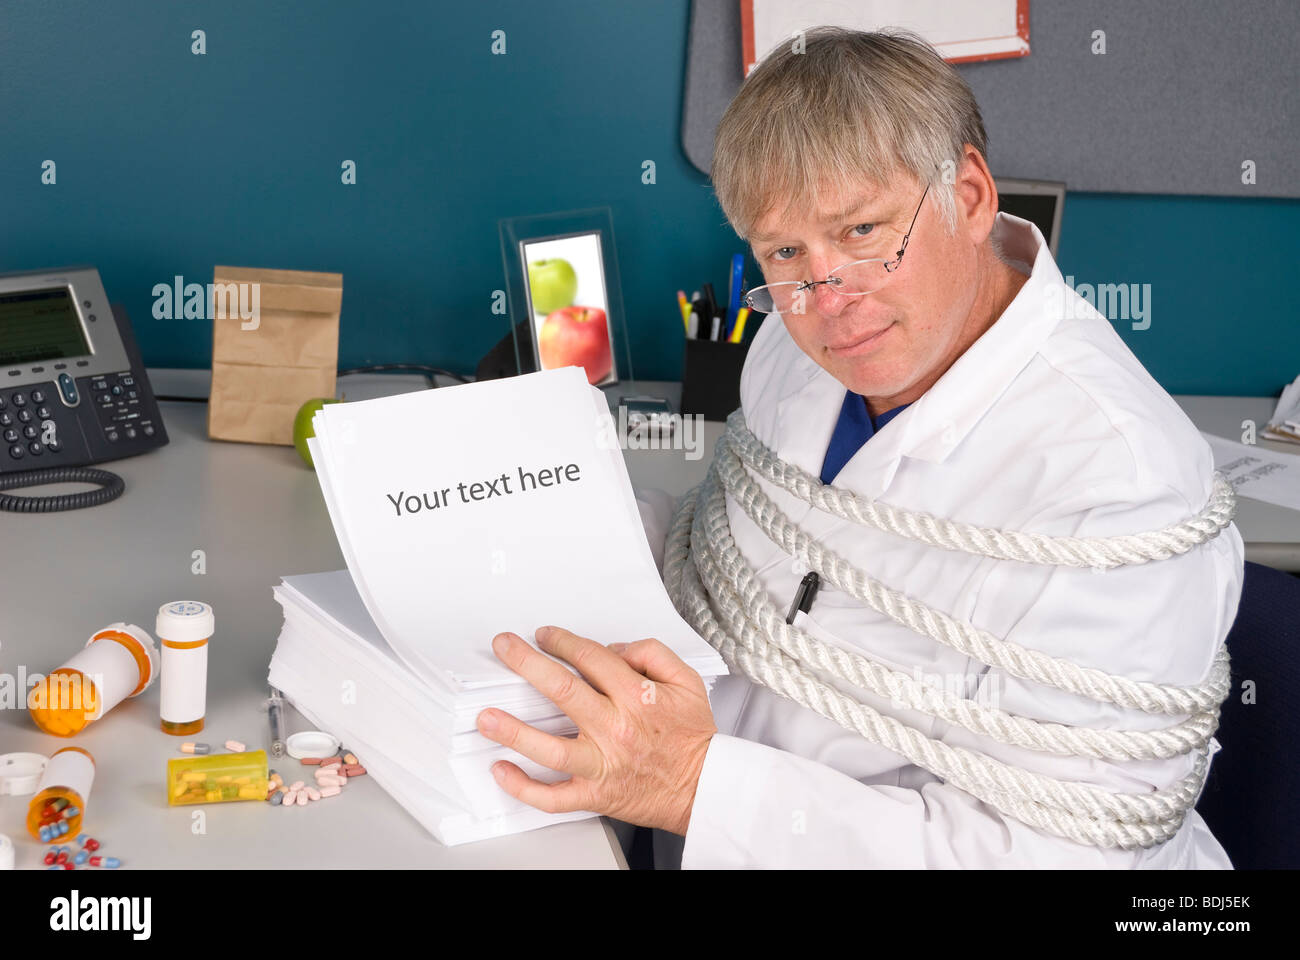 A physician is tied up with a load of bureaucratic paperwork preventing him from doing his job. Stock Photo